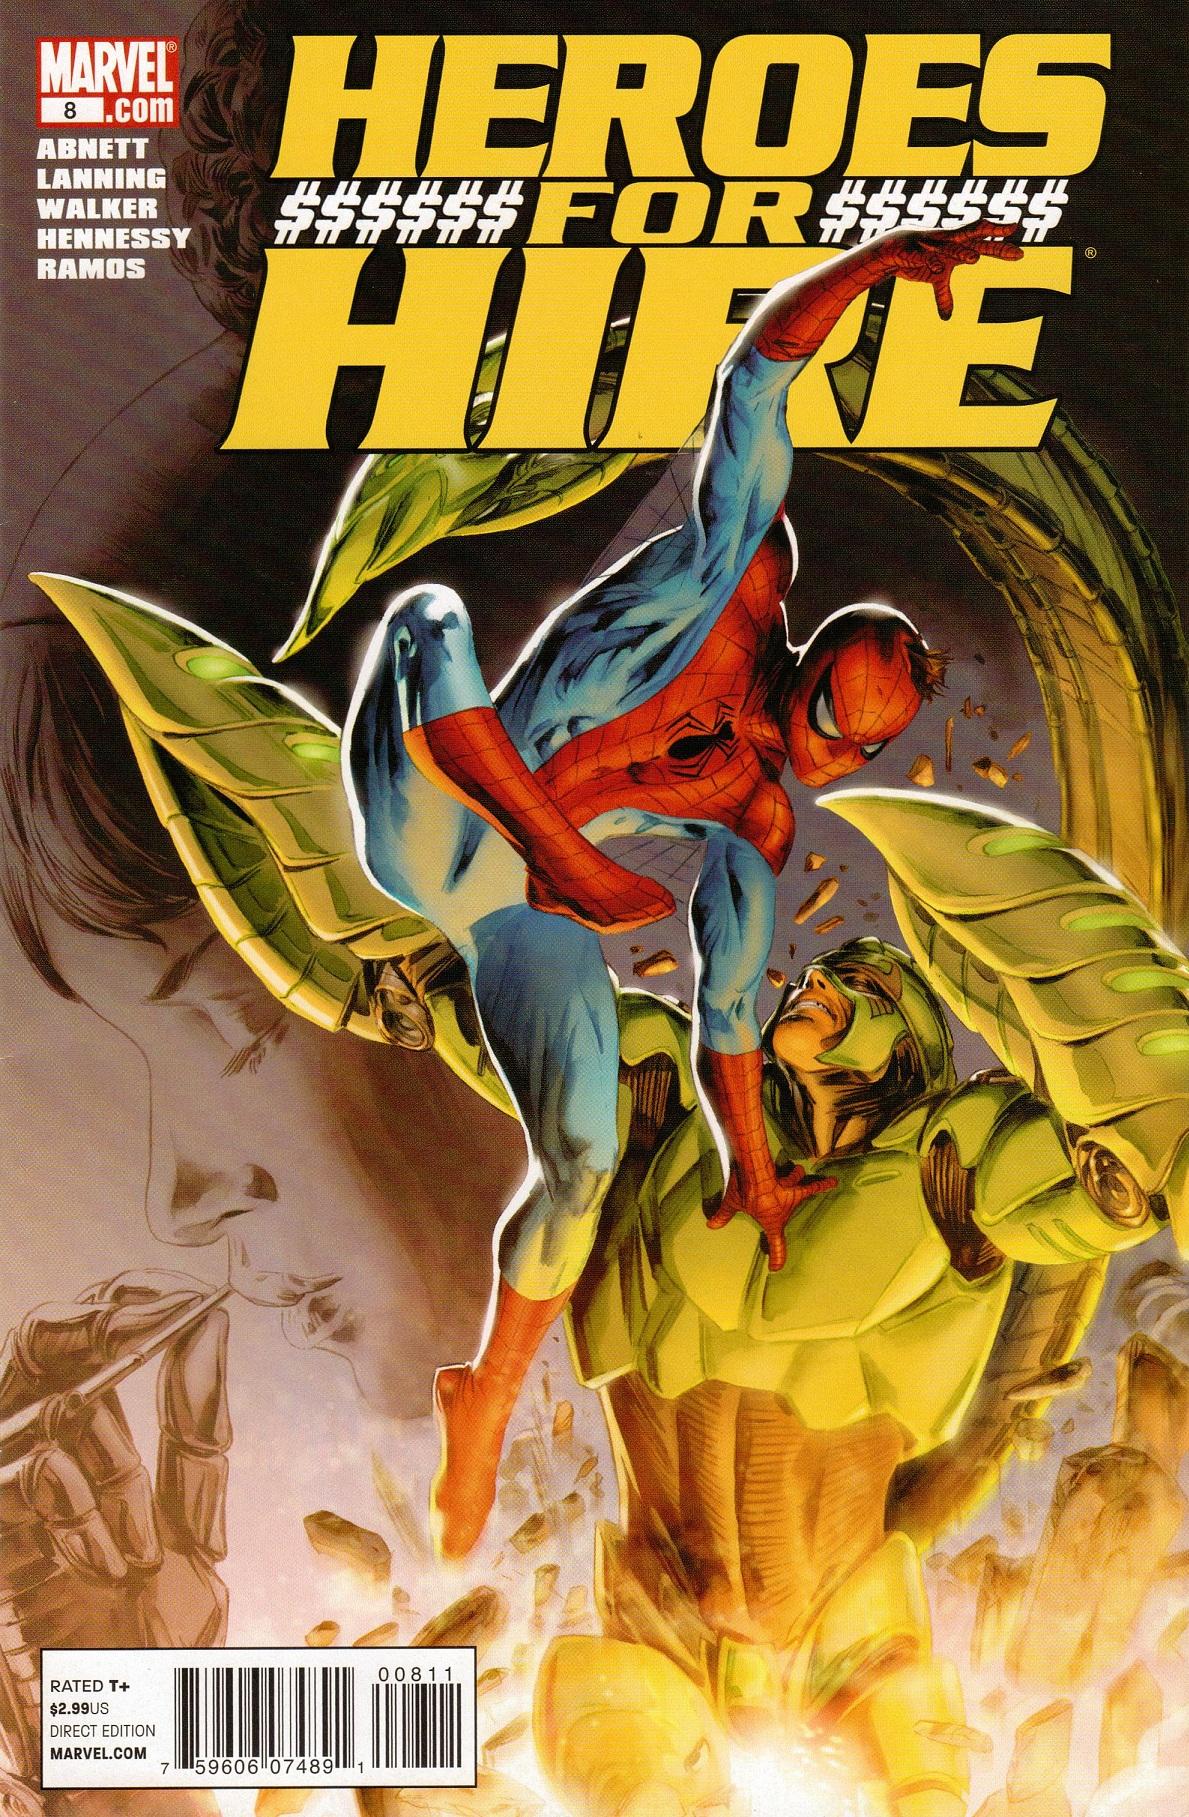 Heroes for Hire Vol. 3 #8